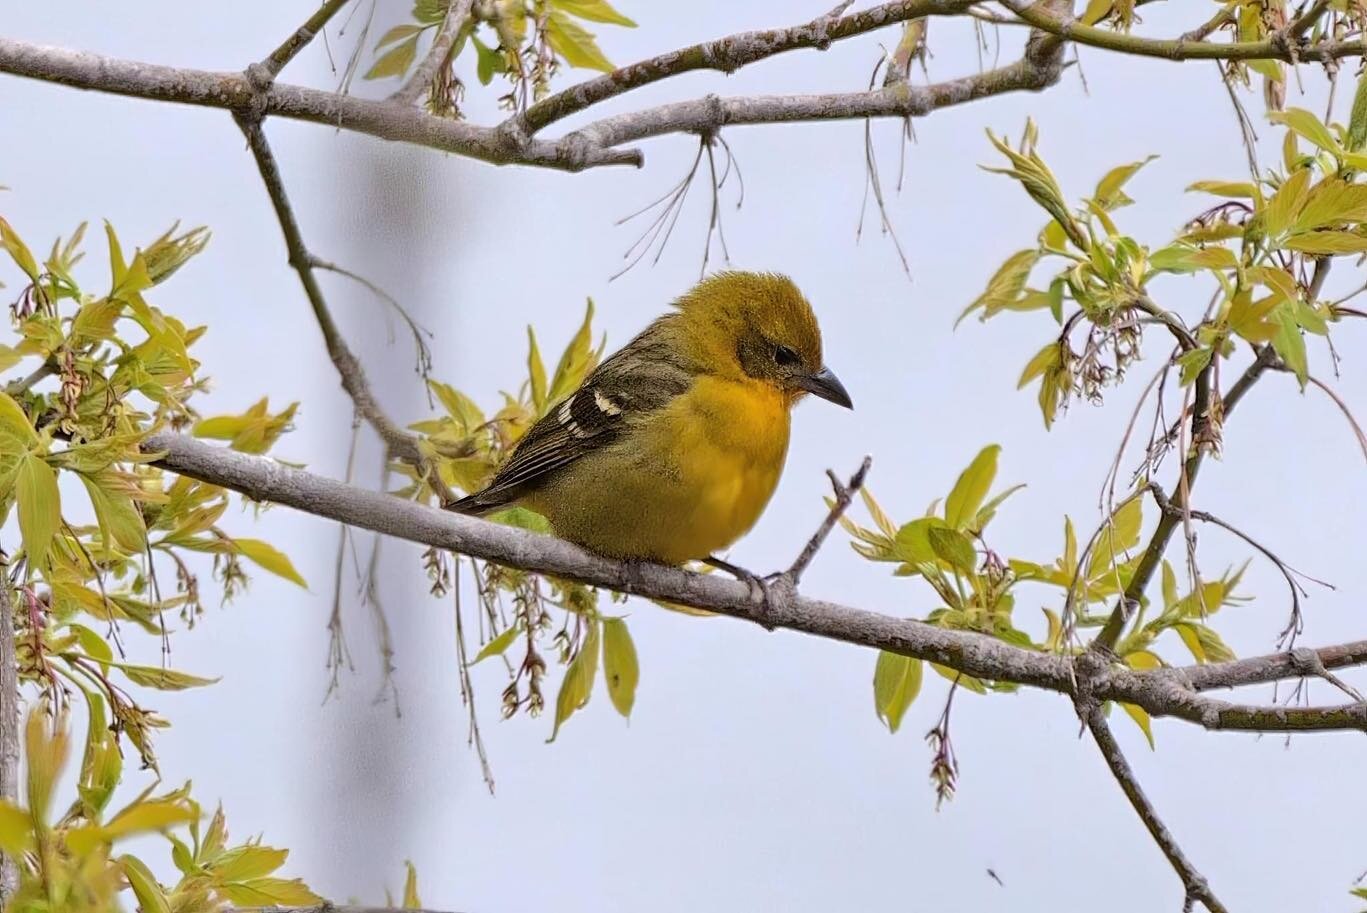 Unlike males, which have a bright red-orange plumage, female Flame-colored Tanagers have a more subdued olive-green plumage with hints of yellow and red on their face and underparts. This is the first seen outside of Arizona, New Mexico or Texas and 